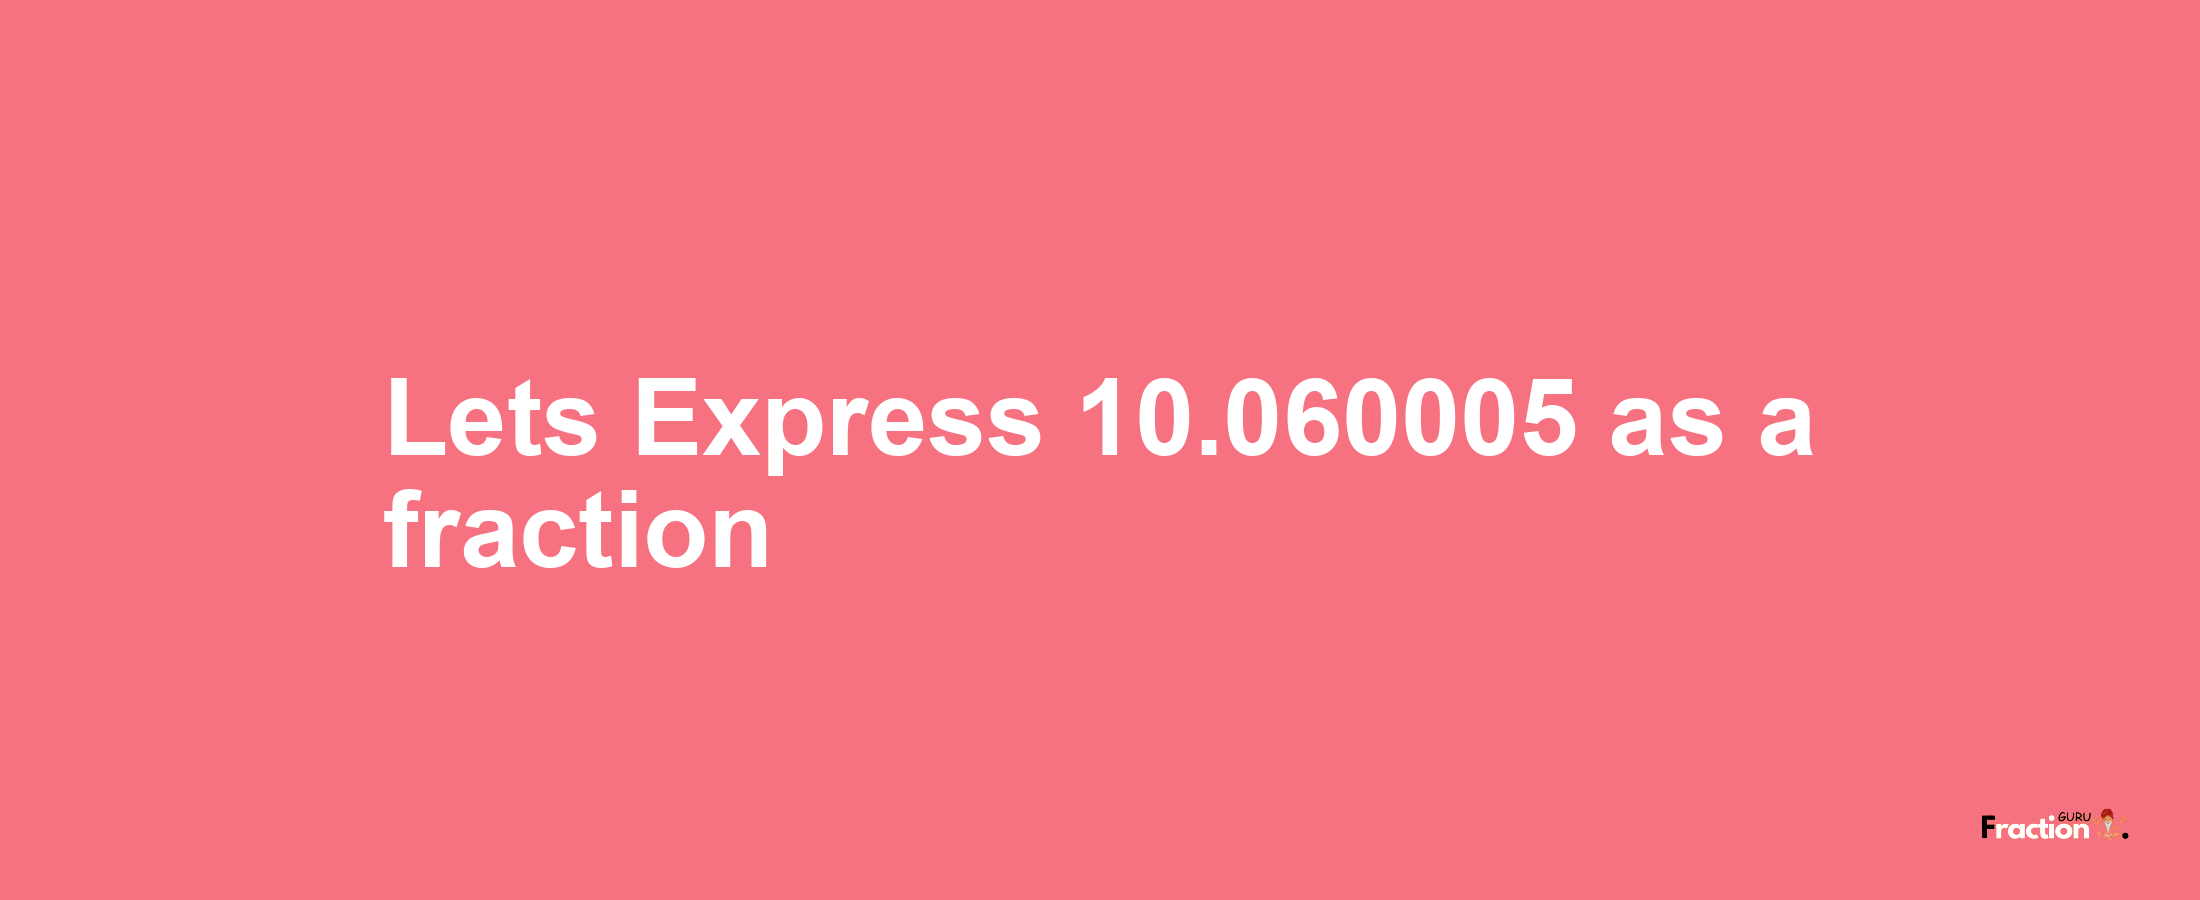 Lets Express 10.060005 as afraction